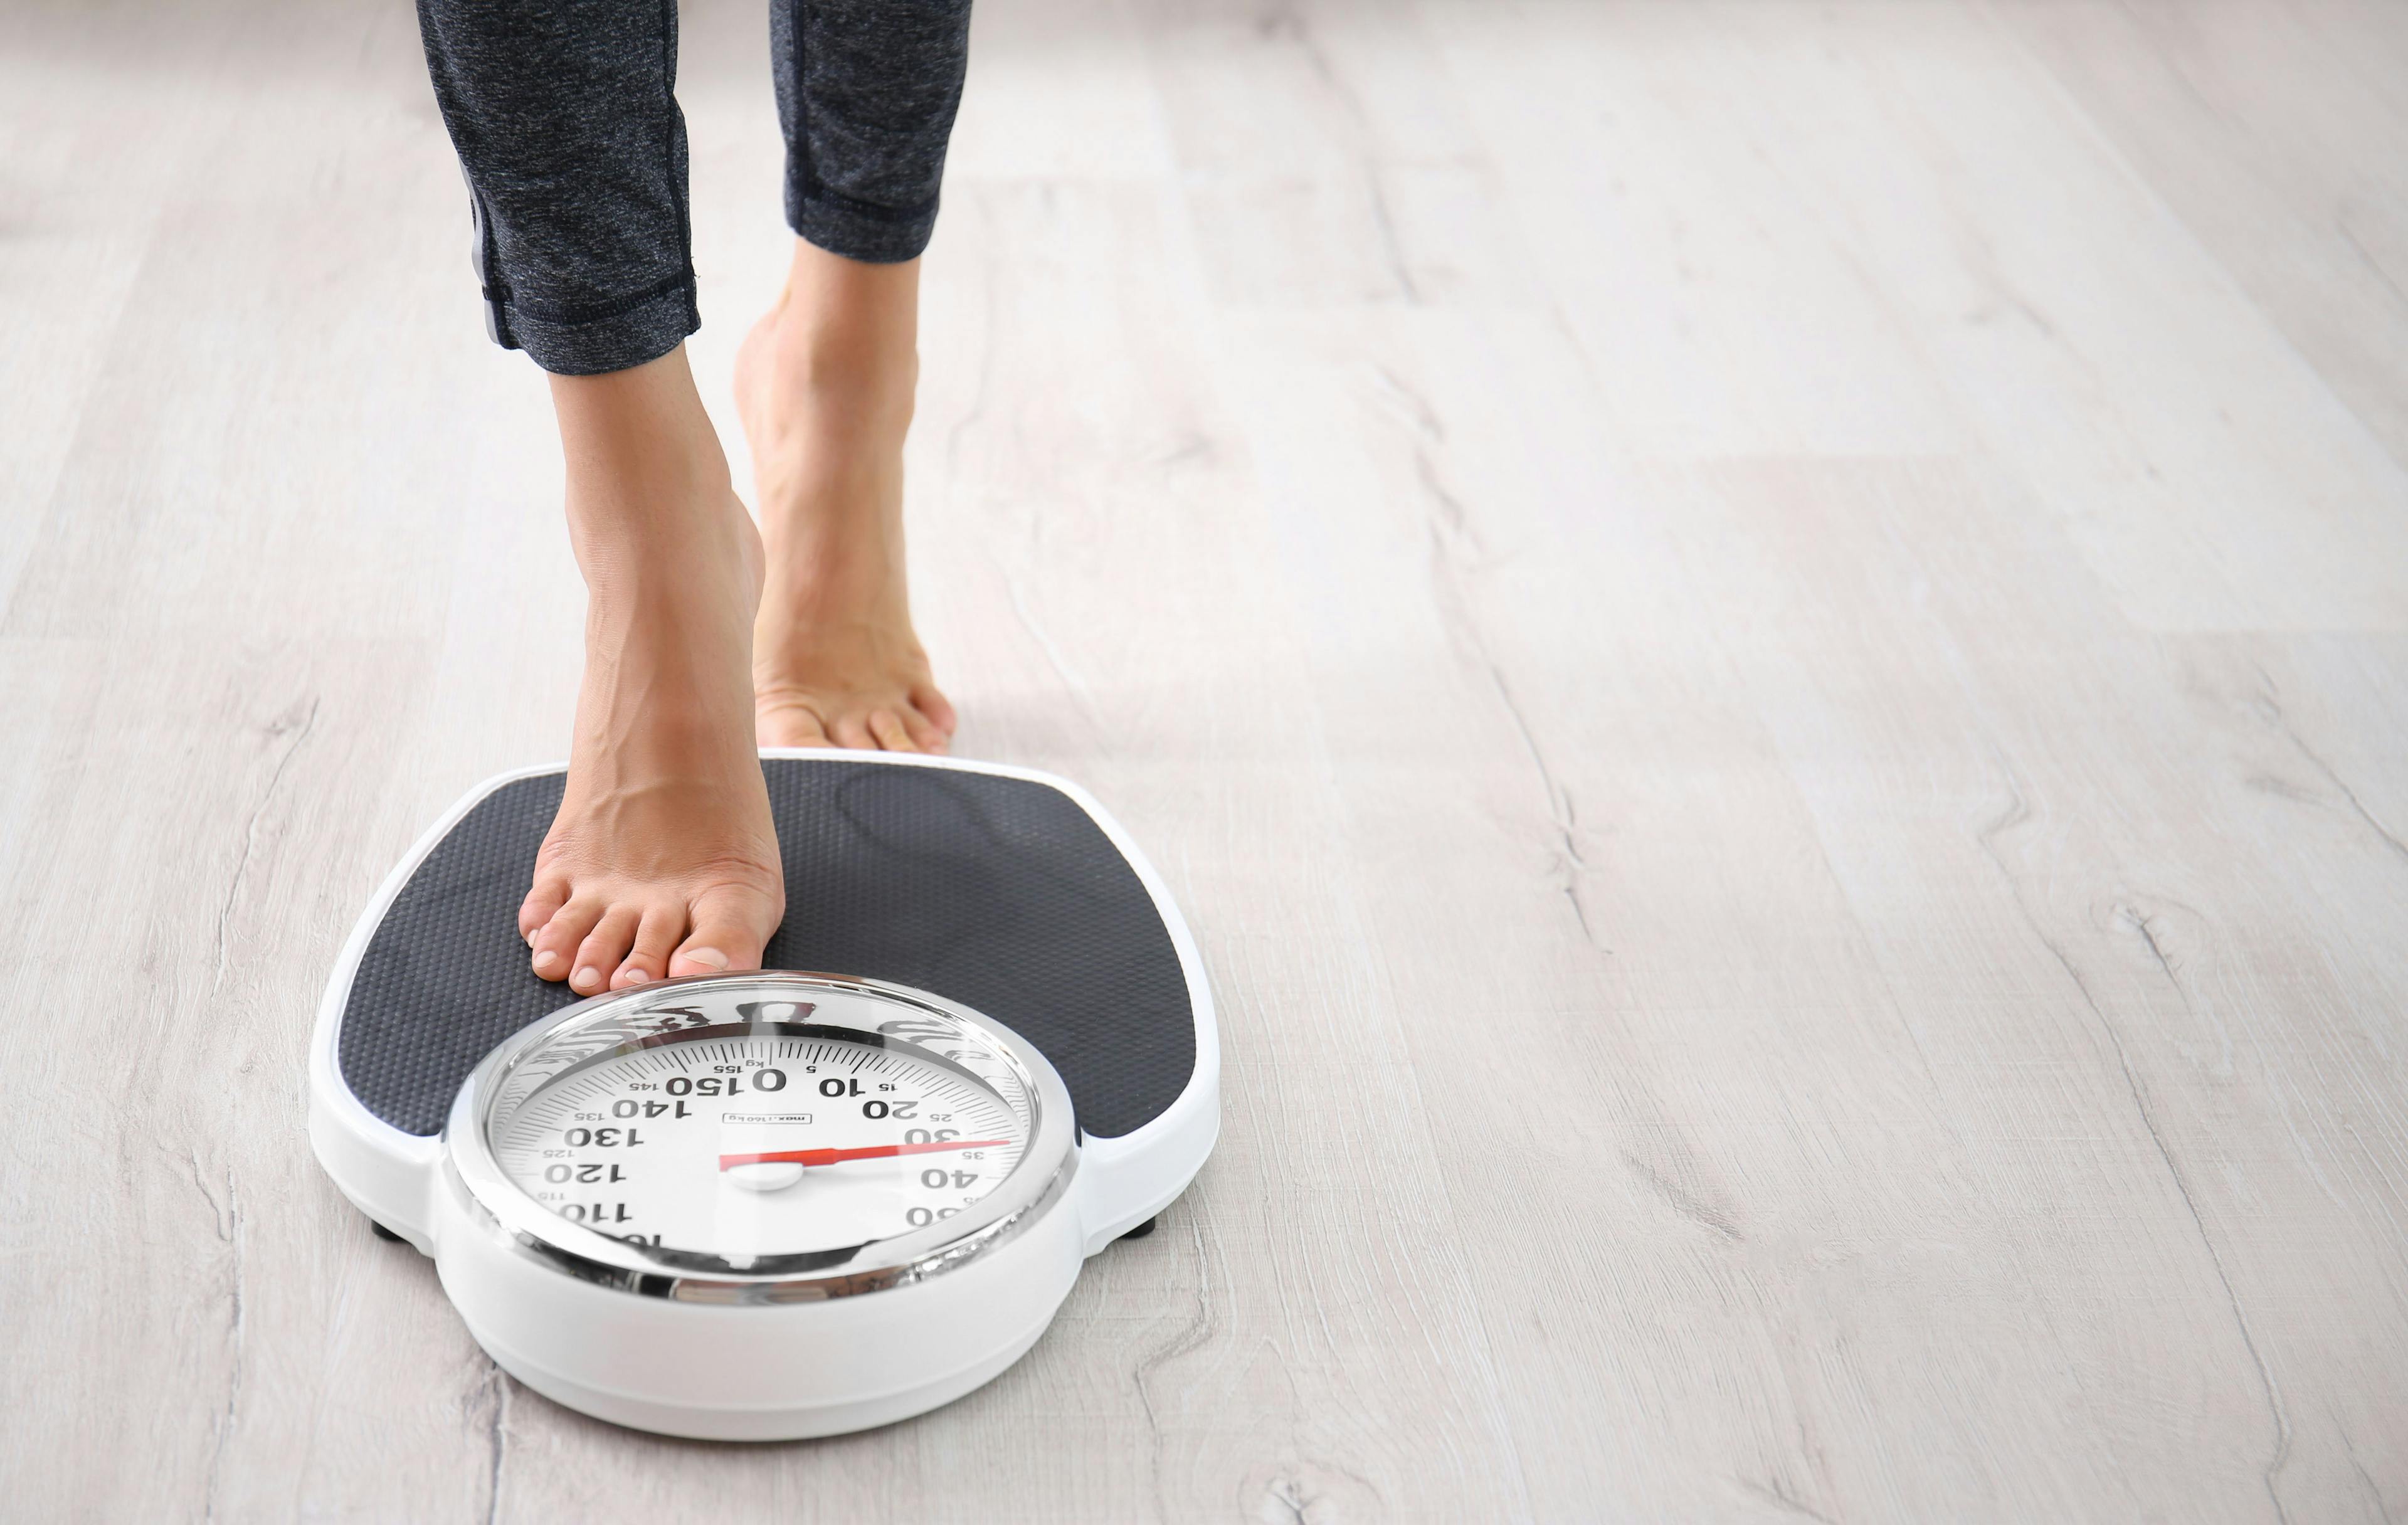 How to reduce weight gain in midlife | Image Credit: © New Africa - © New Africa - stock.adobe.com.